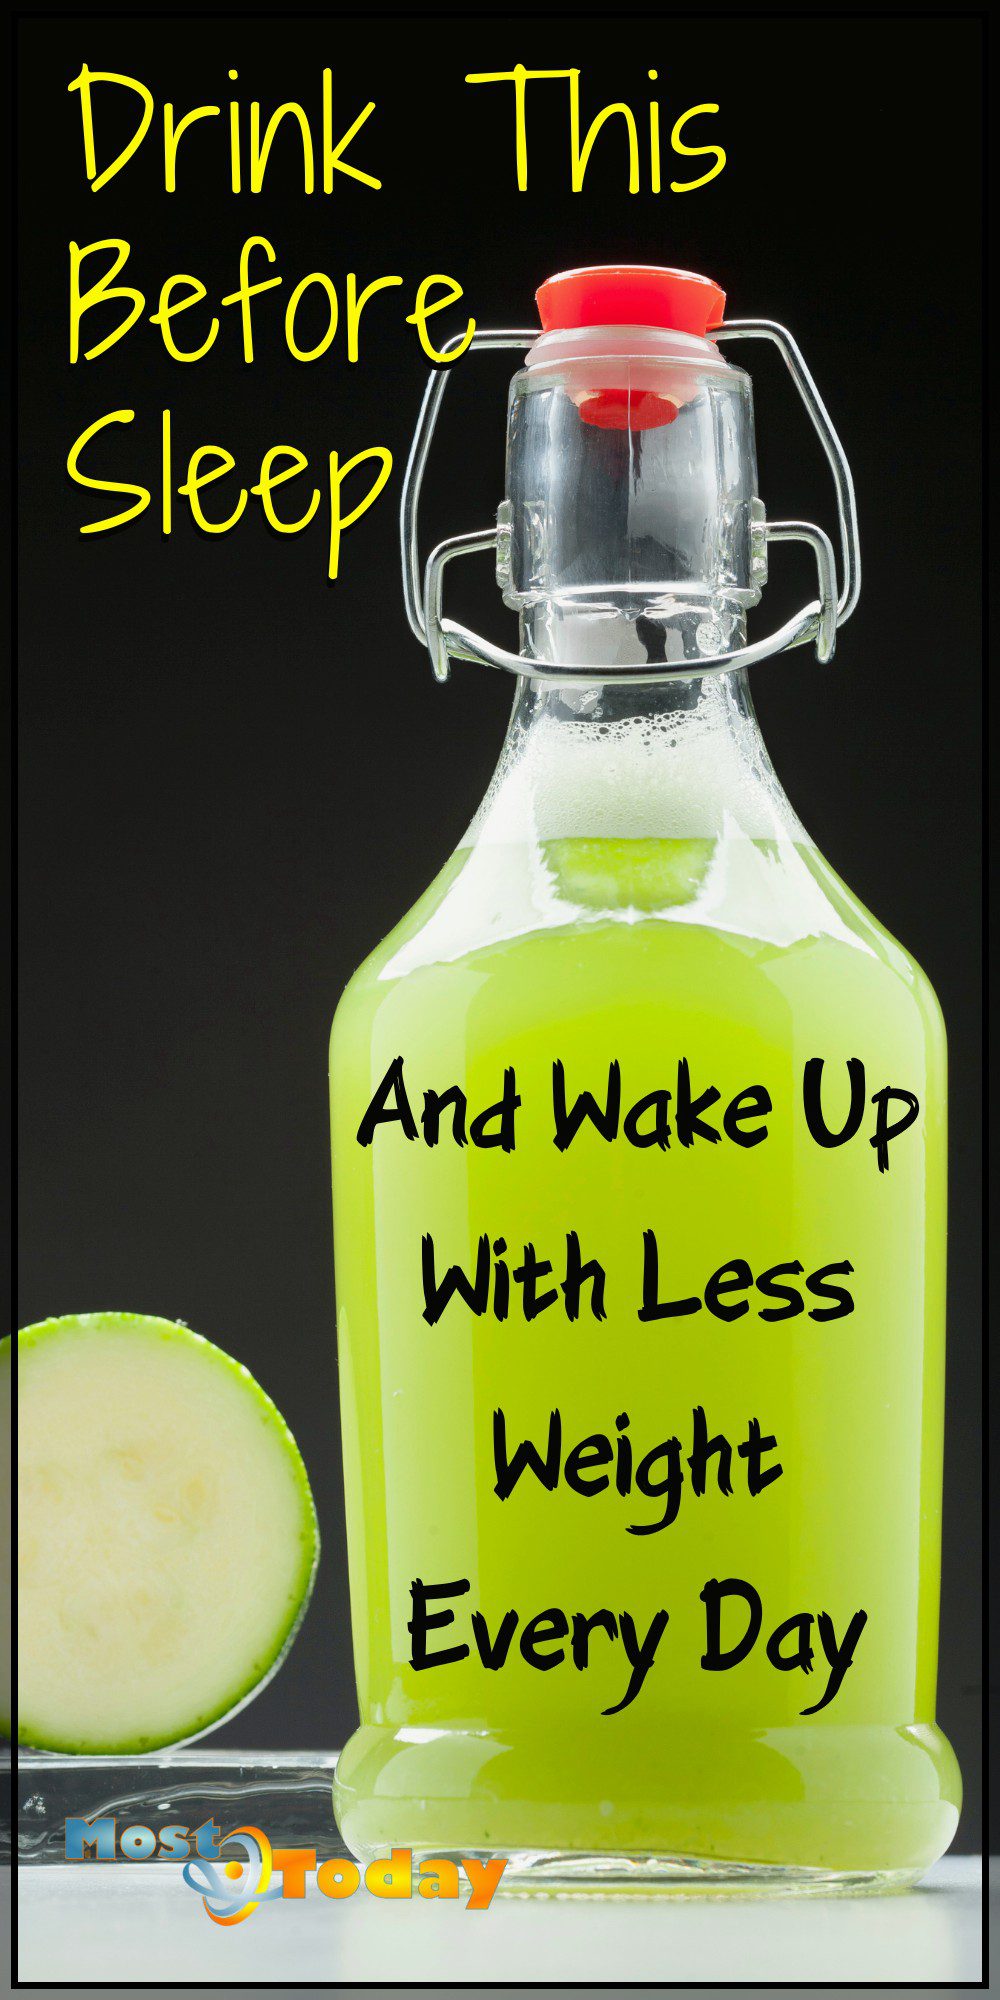 Wake Up With Less Weight Every Day! Drink This Before Sleep